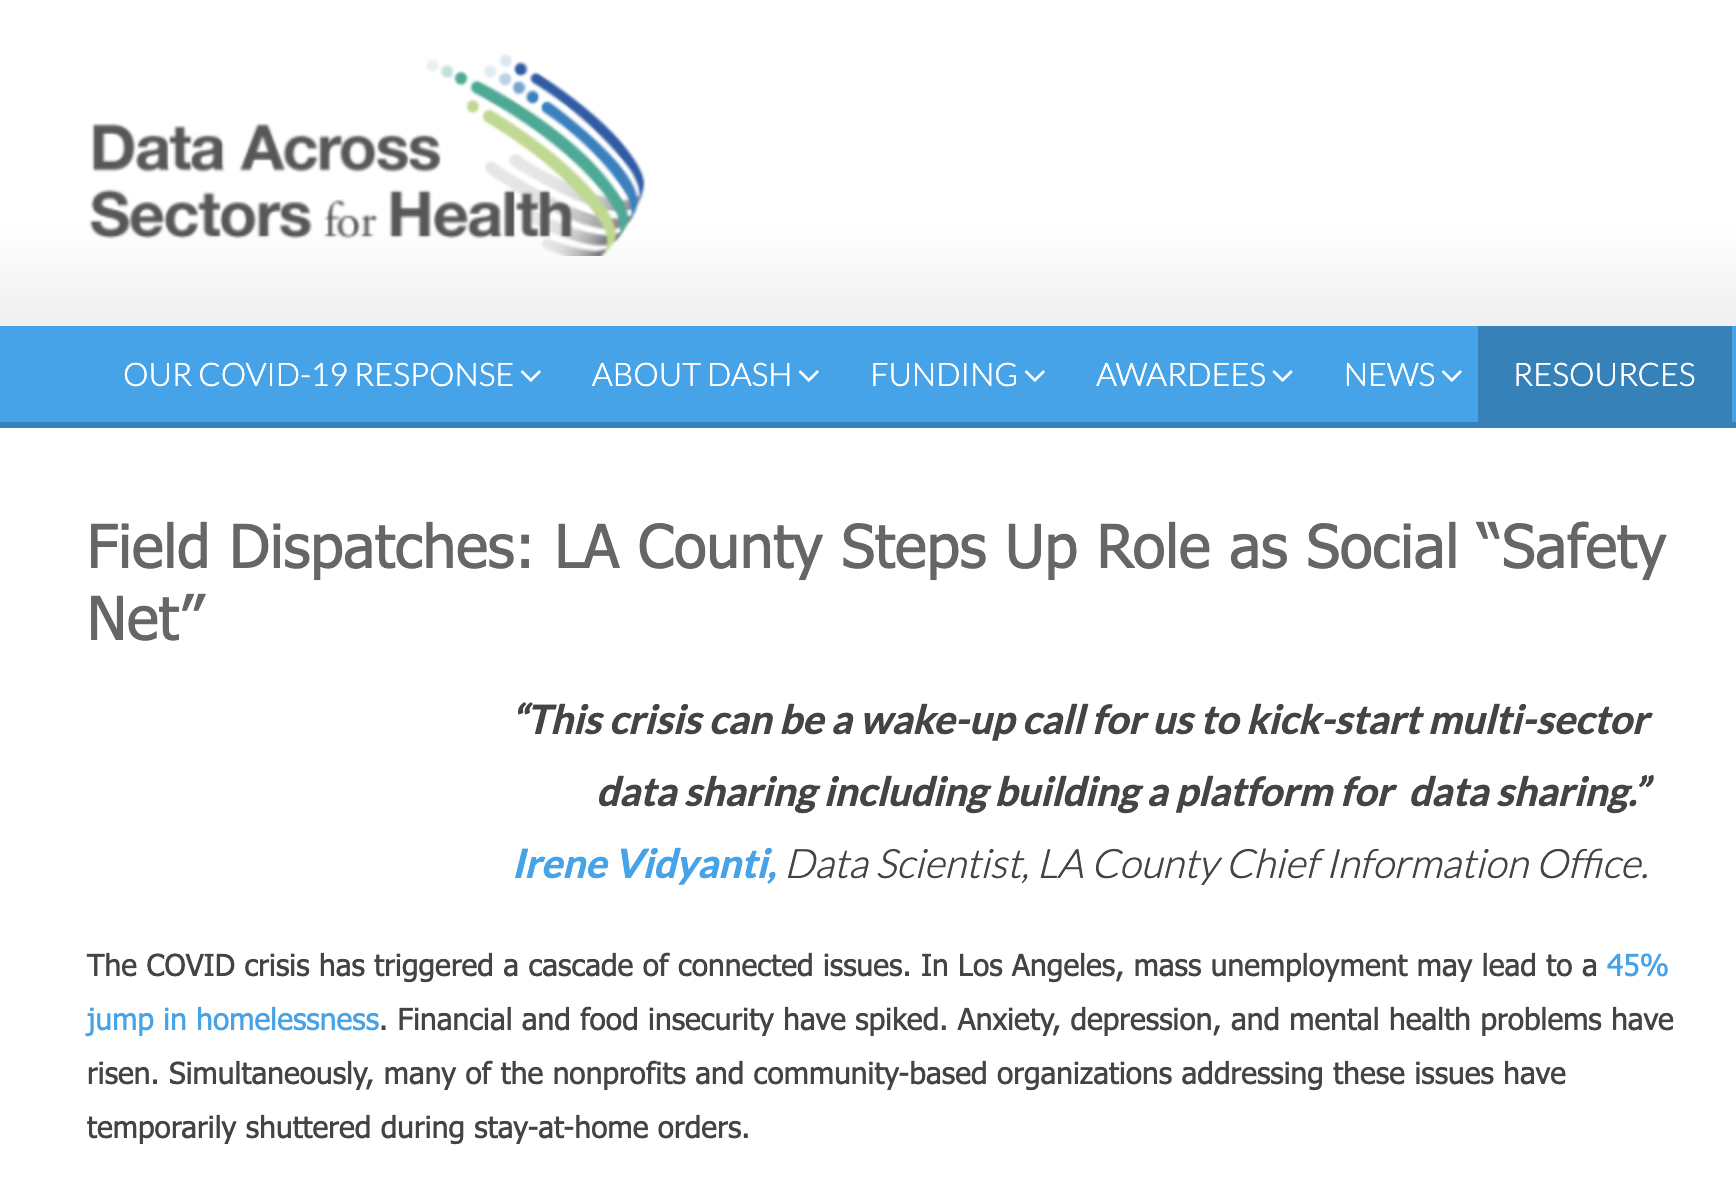 Field Dispatches: LA County Steps Up Role as Social “Safety Net”